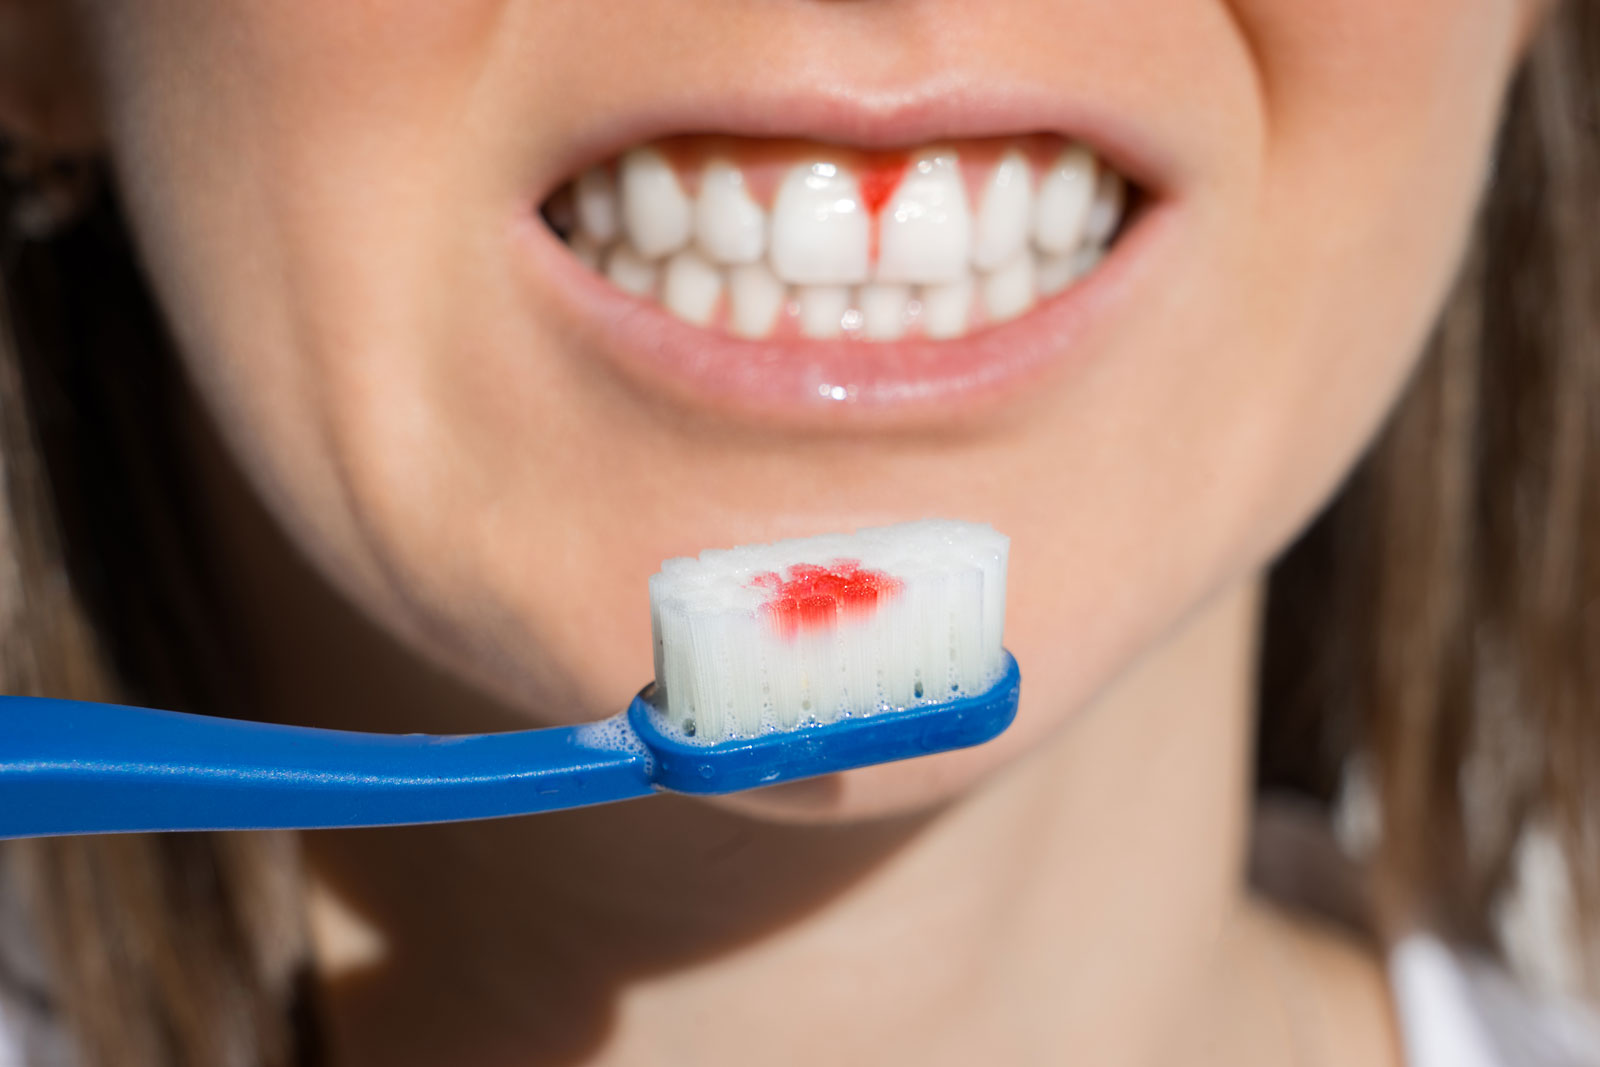 Bleeding Gums When Flossing: Should You Call Your Dentist?